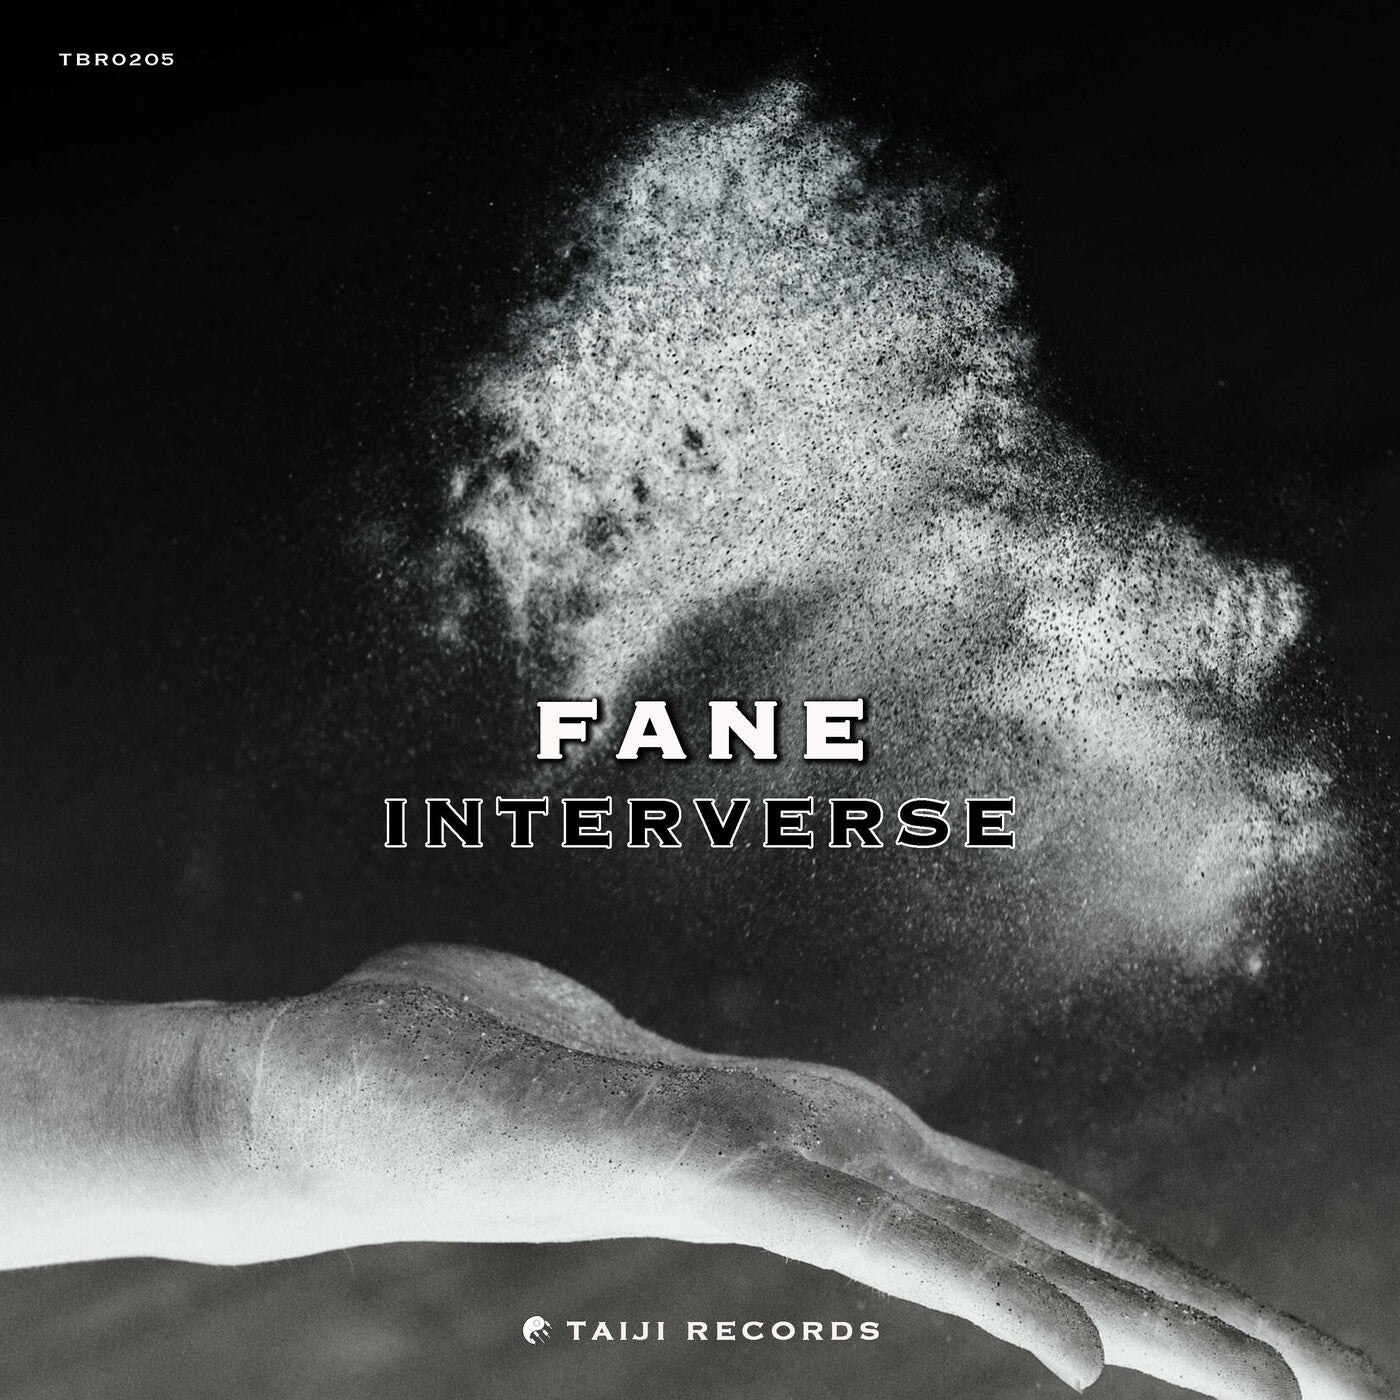 Where to find fane